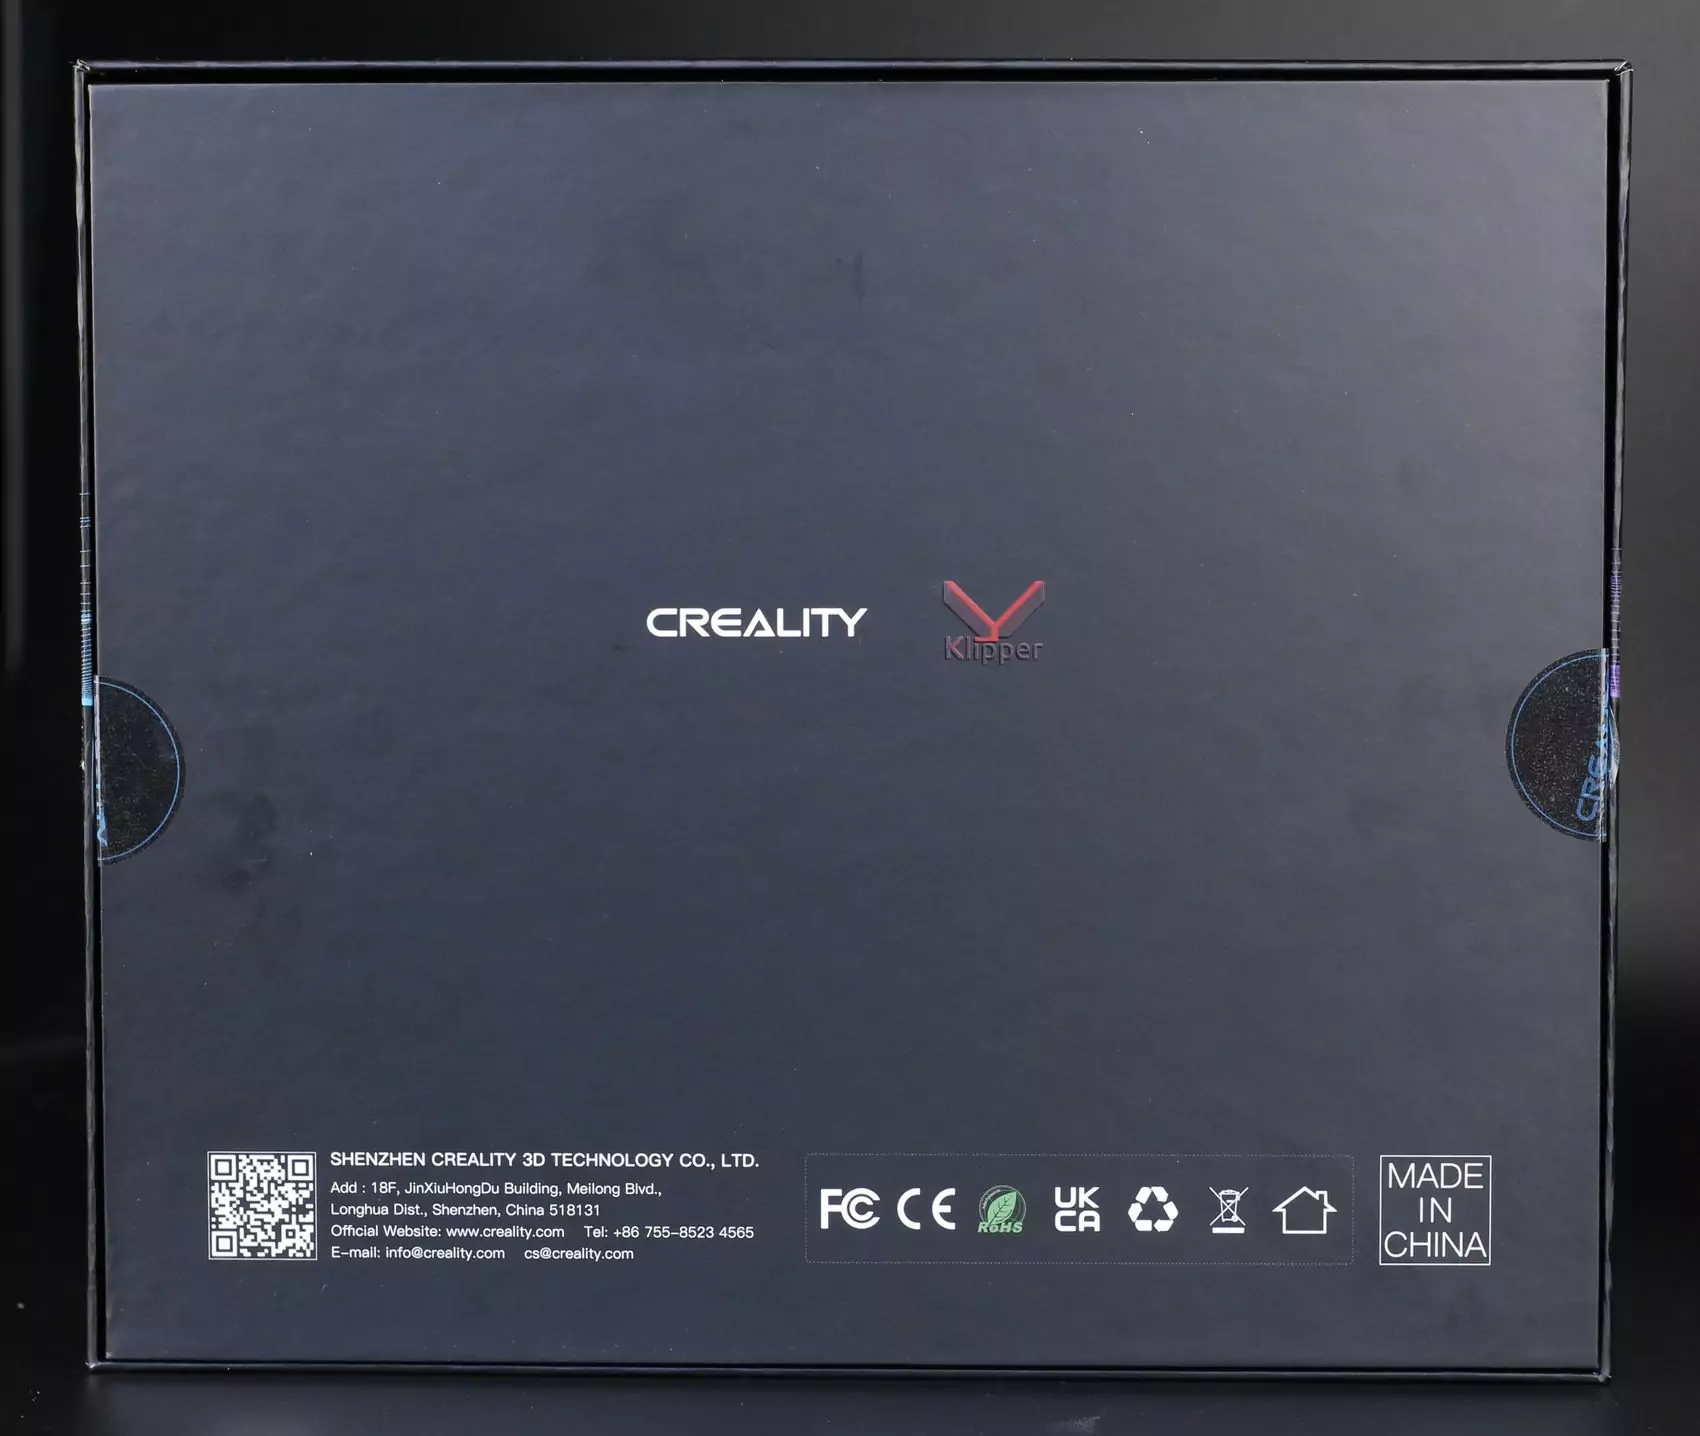 Creality Sonic Pad Review Packaging2 | Creality Sonic Pad Review: Klipper Firmware with Compromises